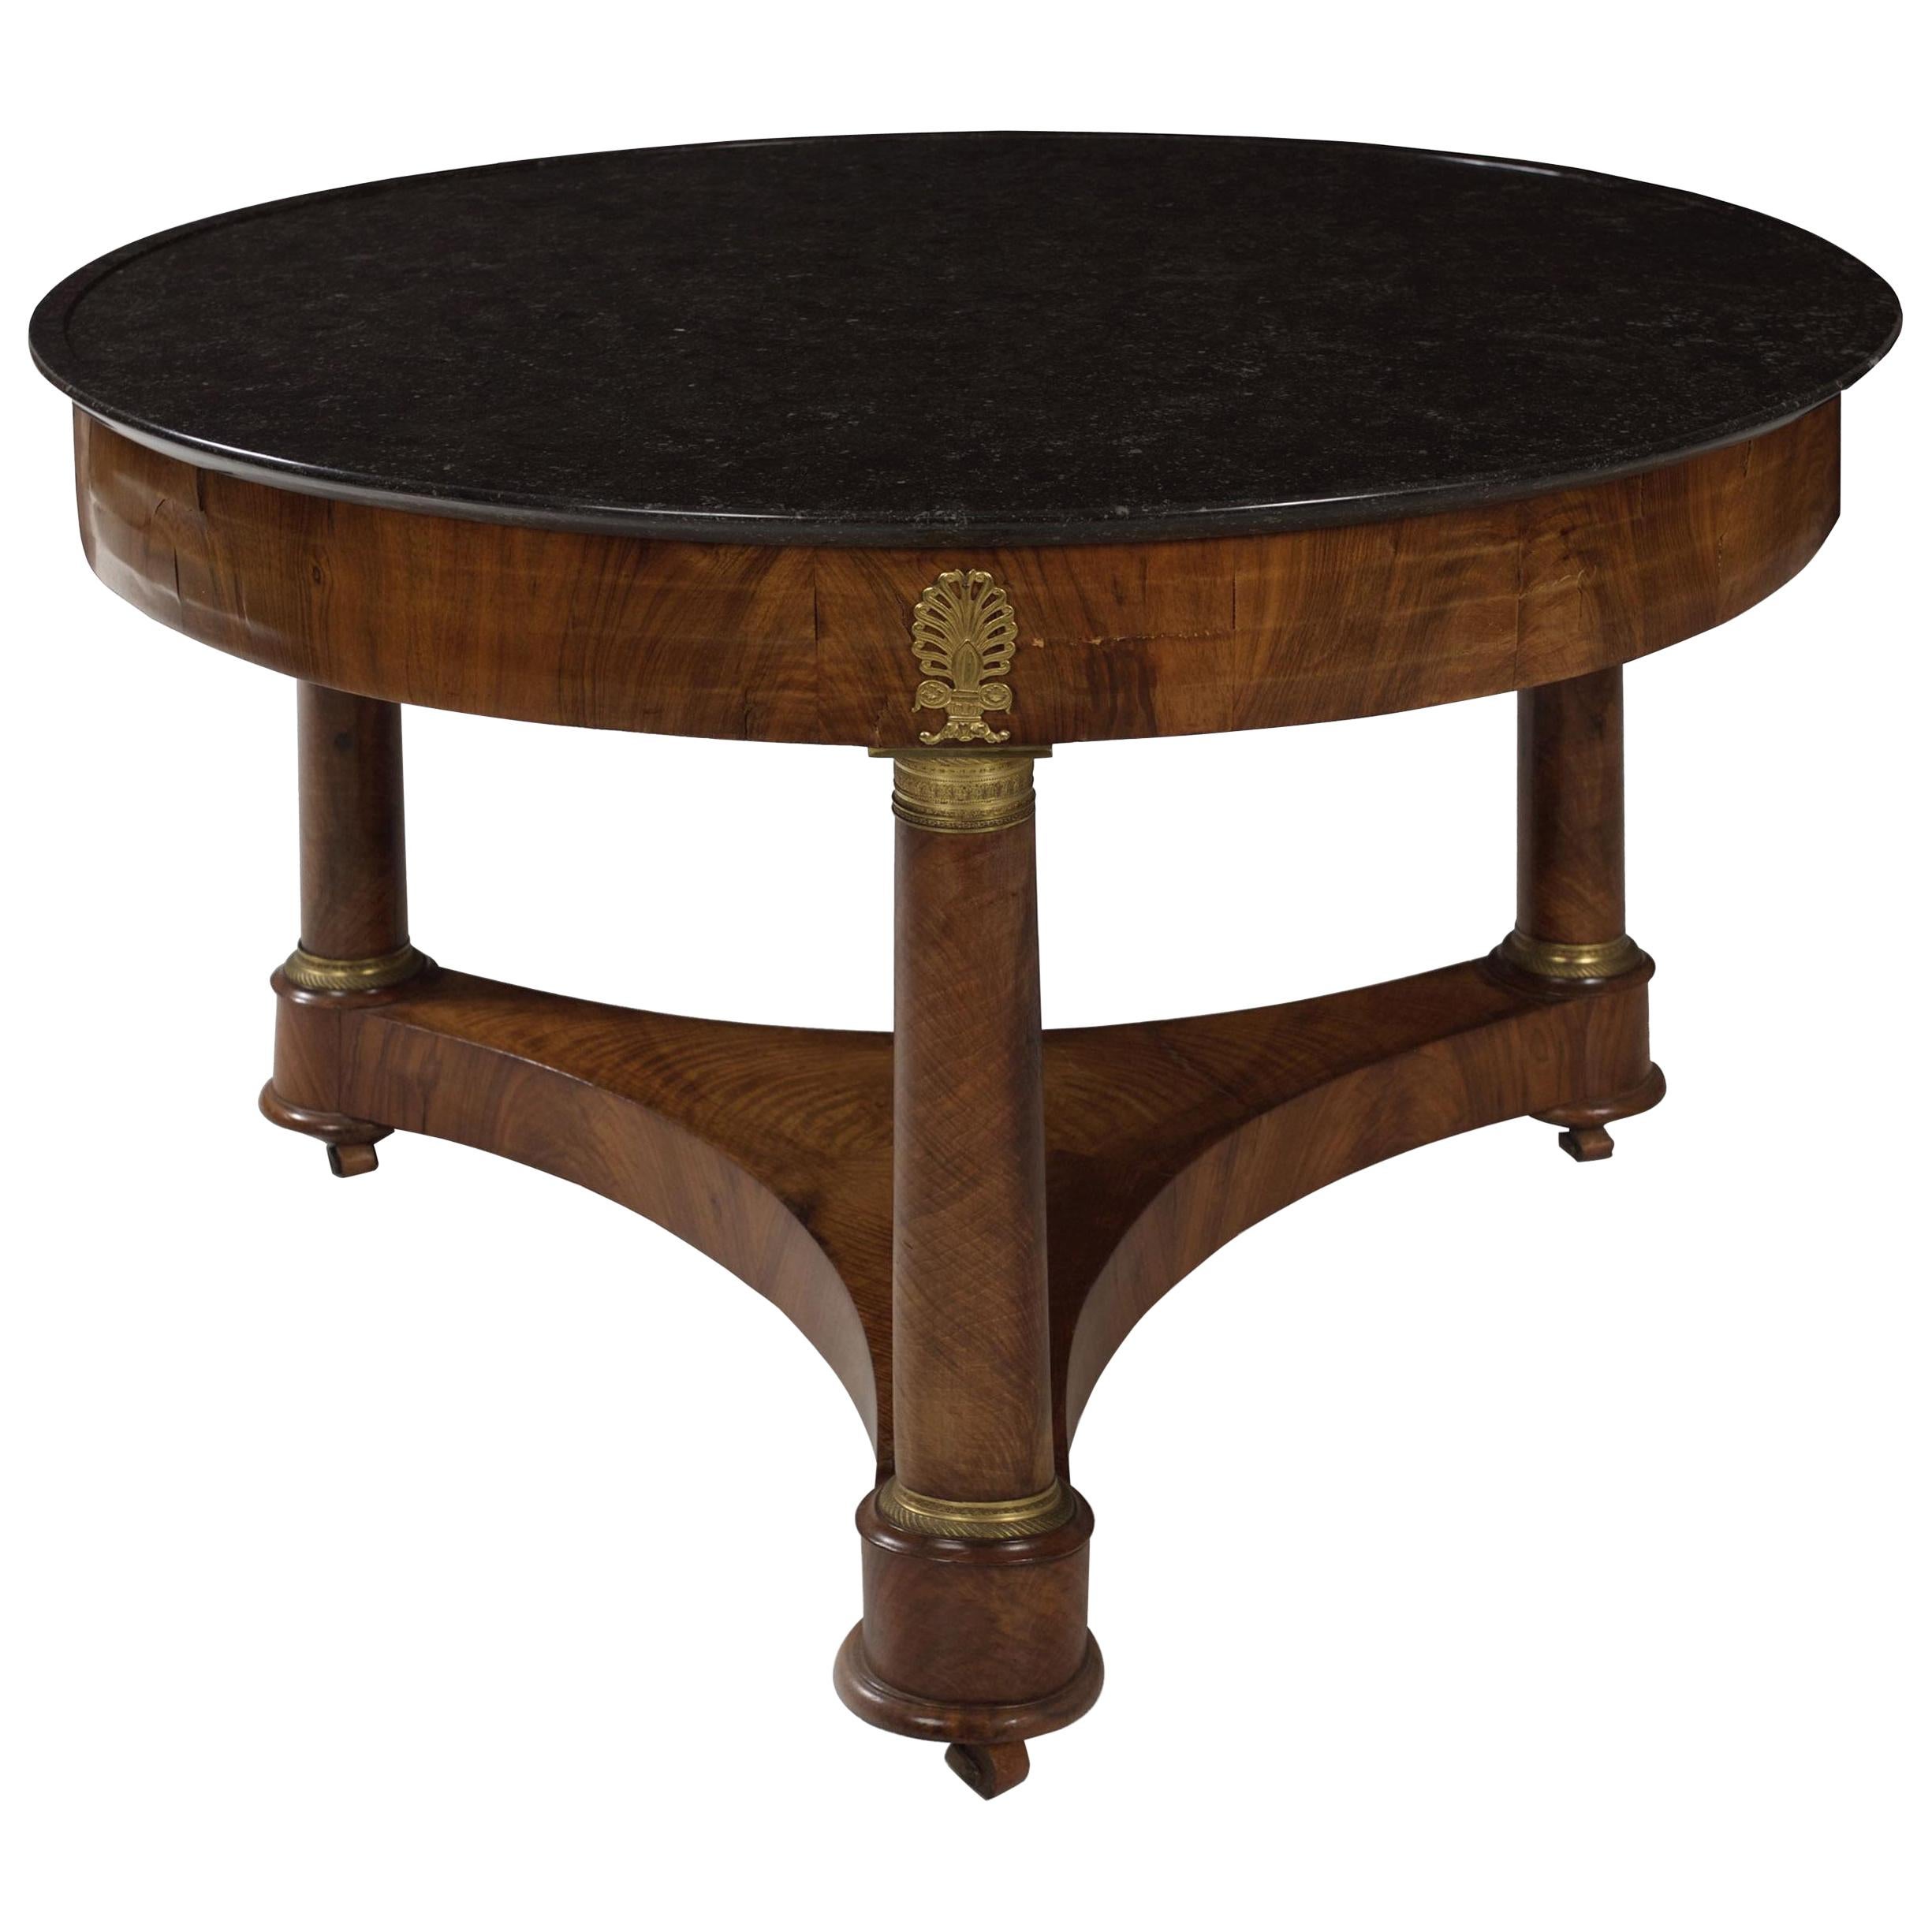 French Empire Antique Burl Walnut Center Table with Black Marble Top, circa 1815 For Sale